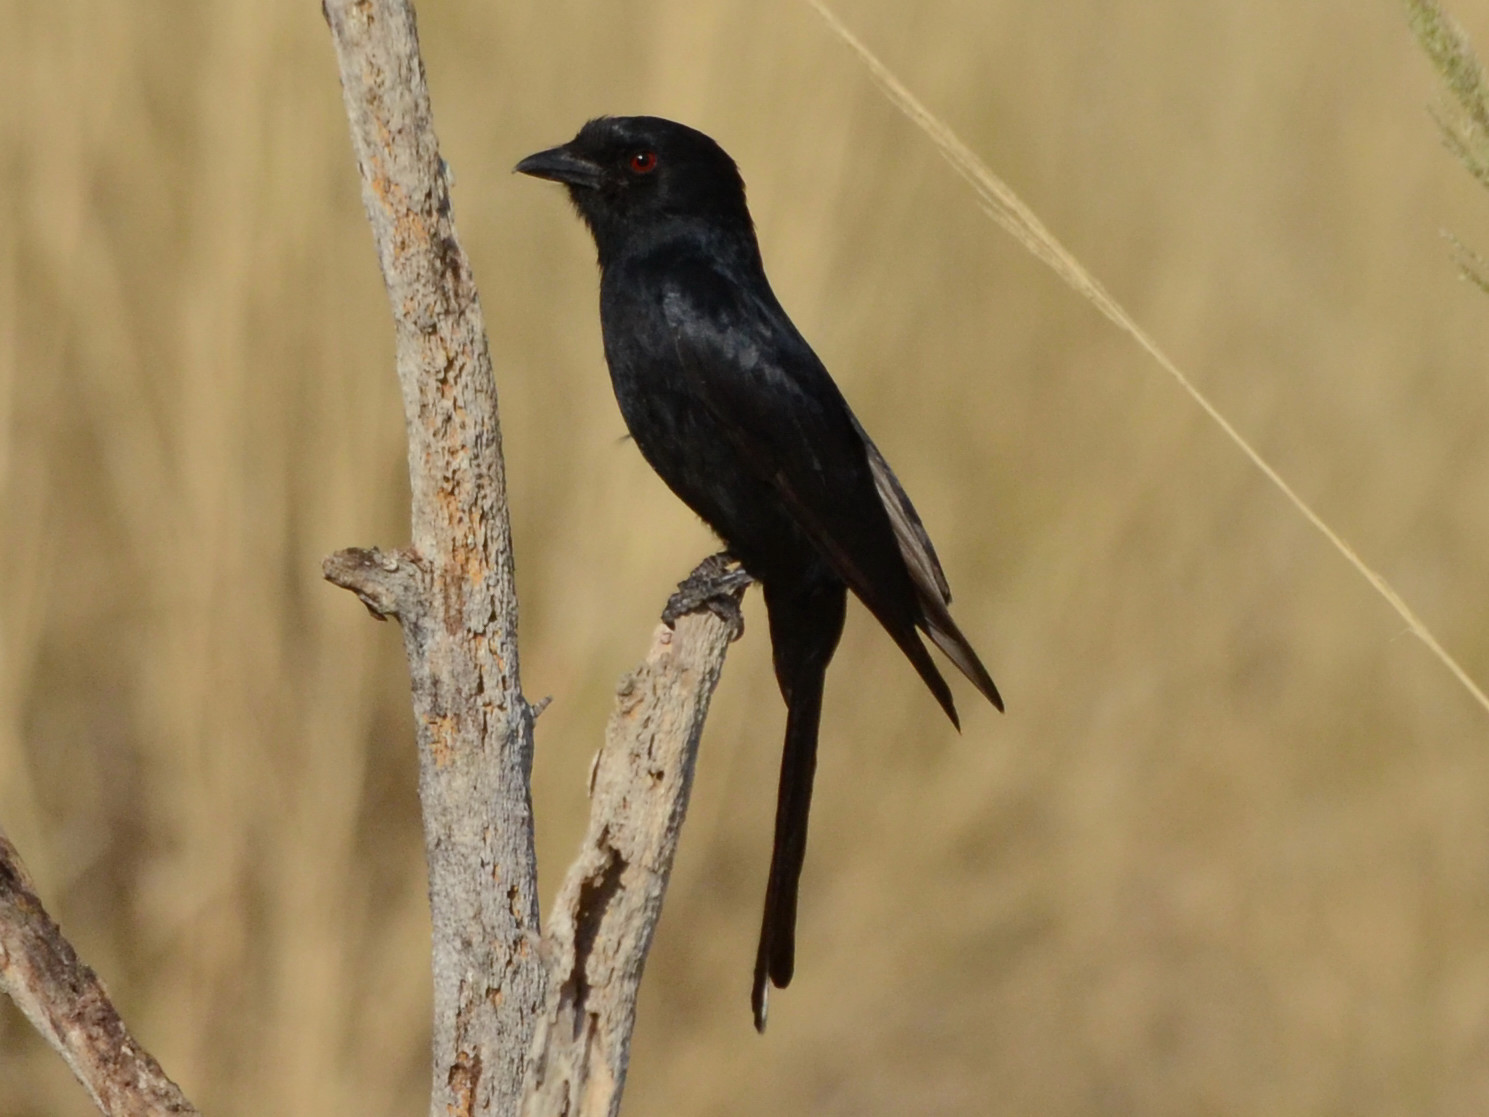 Click picture to see more Fork-tailed Drongos.